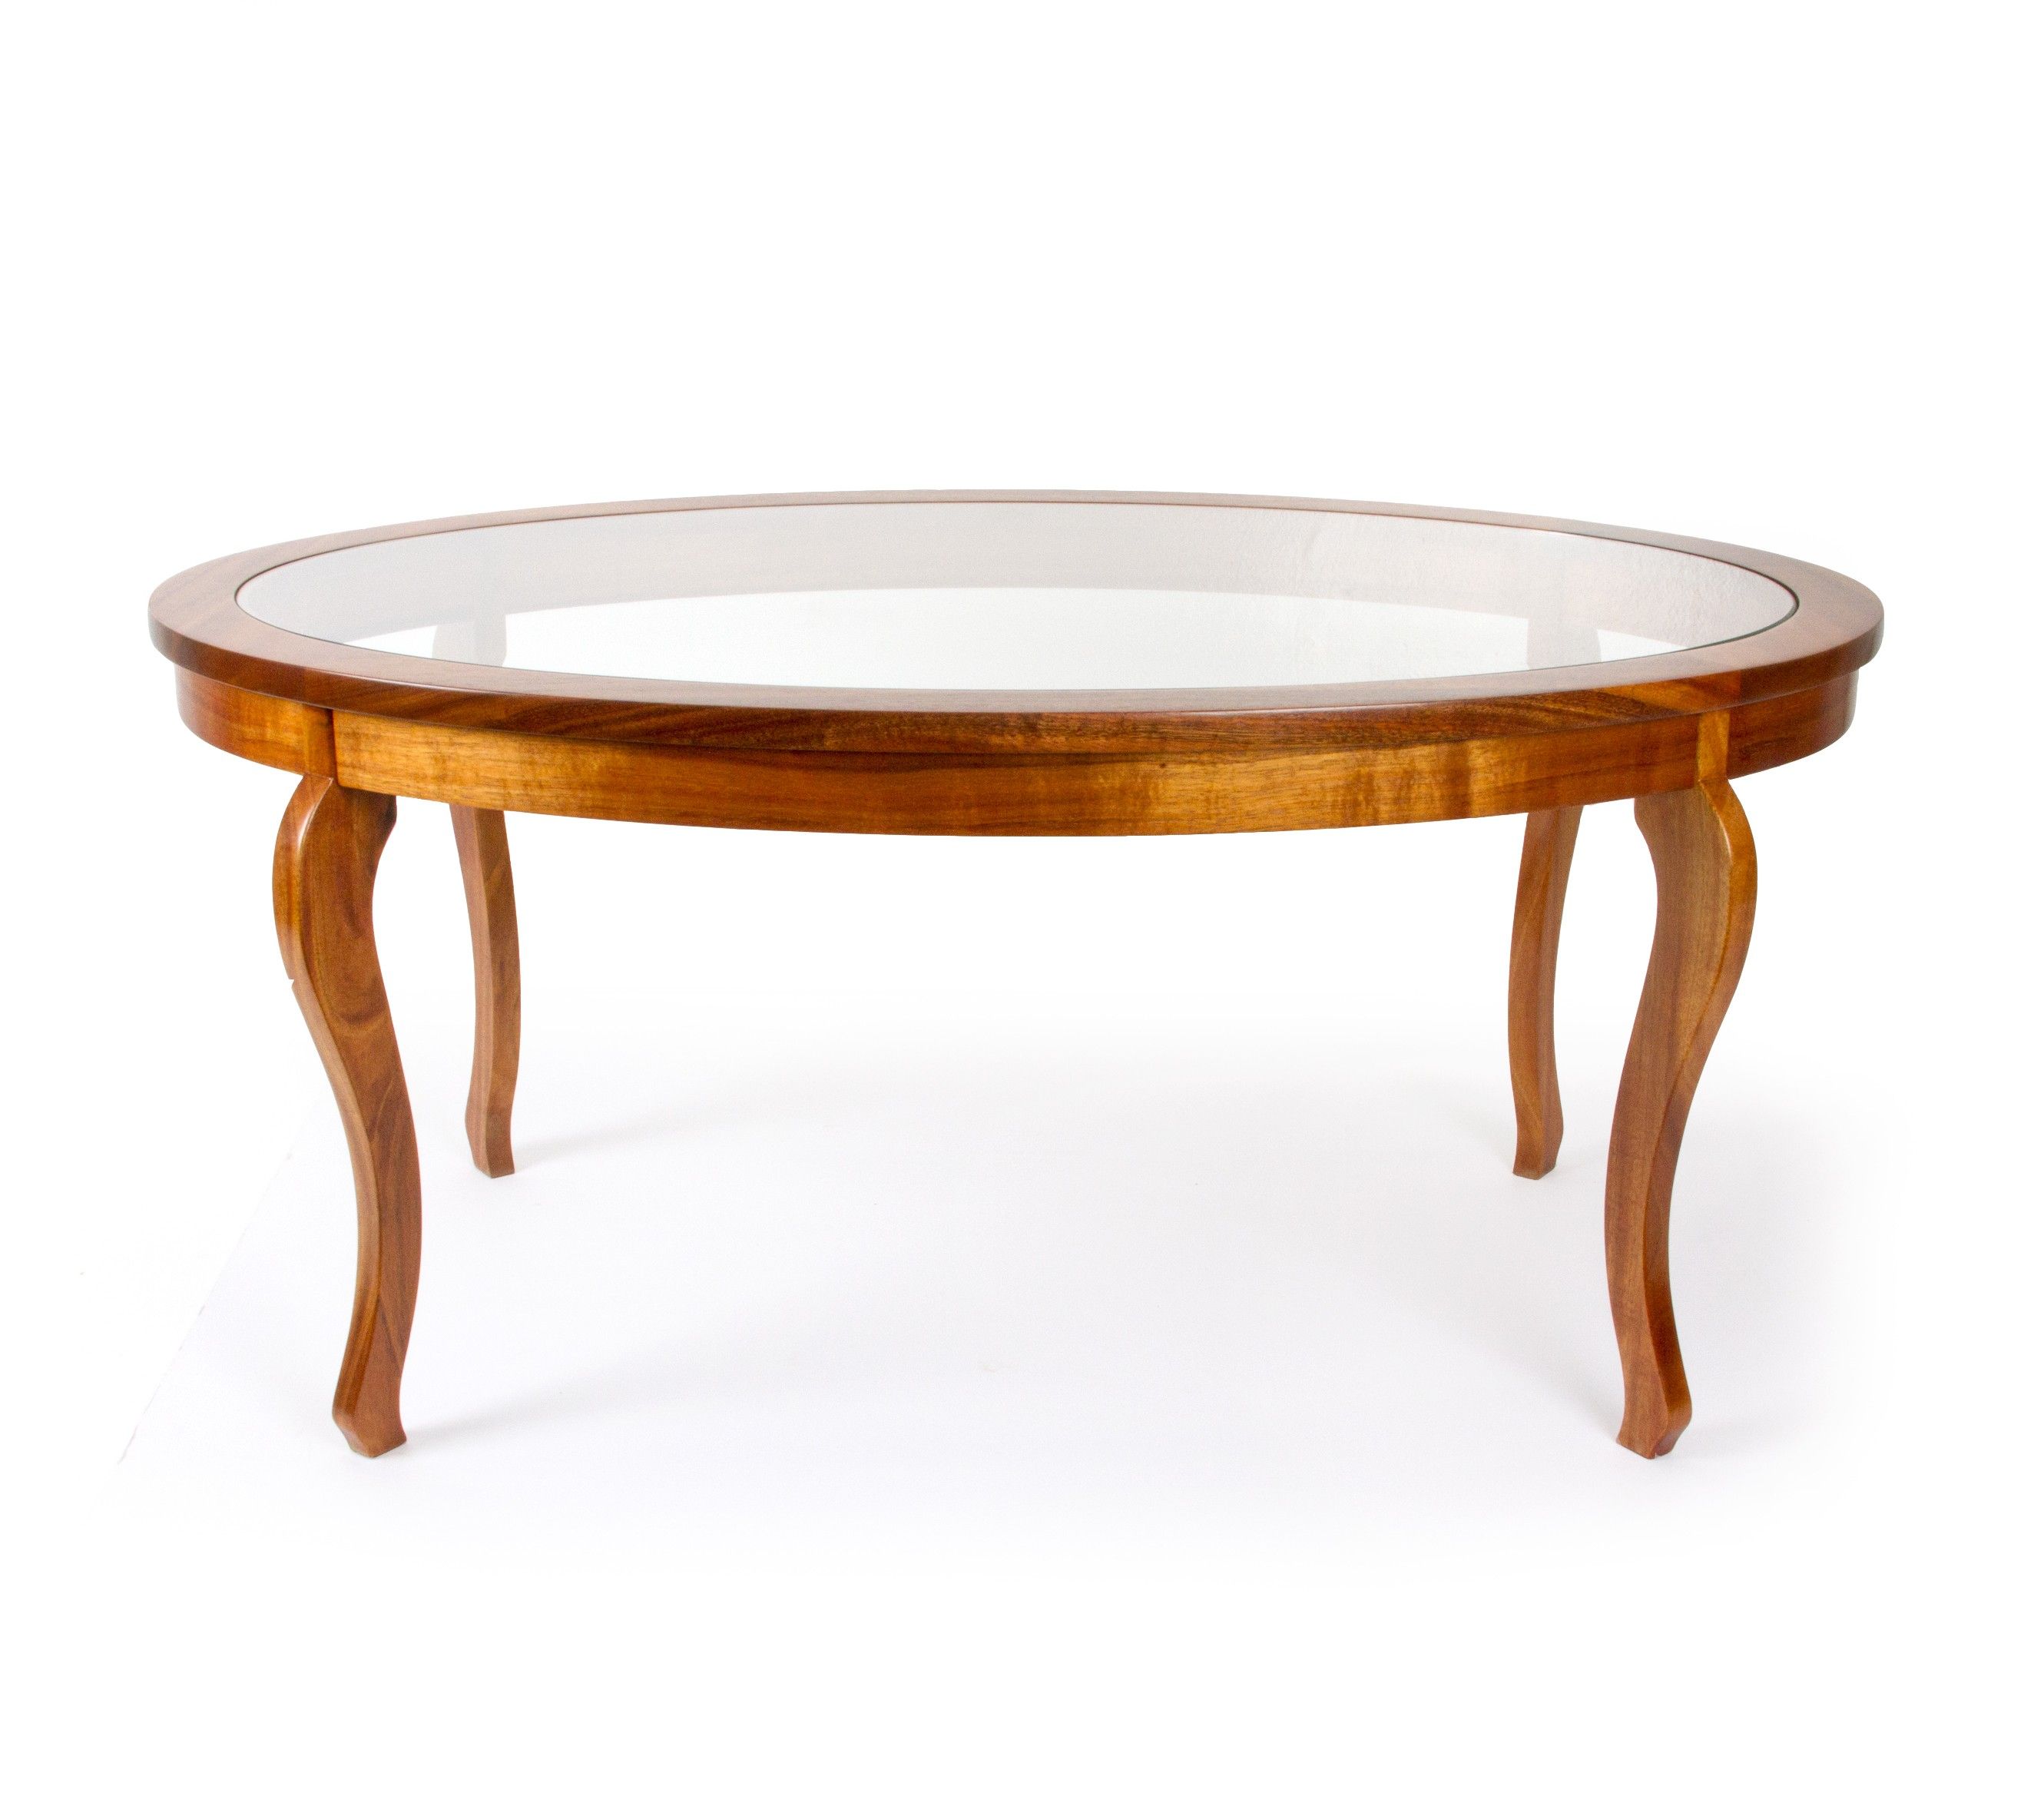 Furniture Oval Coffee Table With Glass Top And High Legs For Small Rustic Living Room Small Round Glass Top Coffee Table (View 5 of 10)